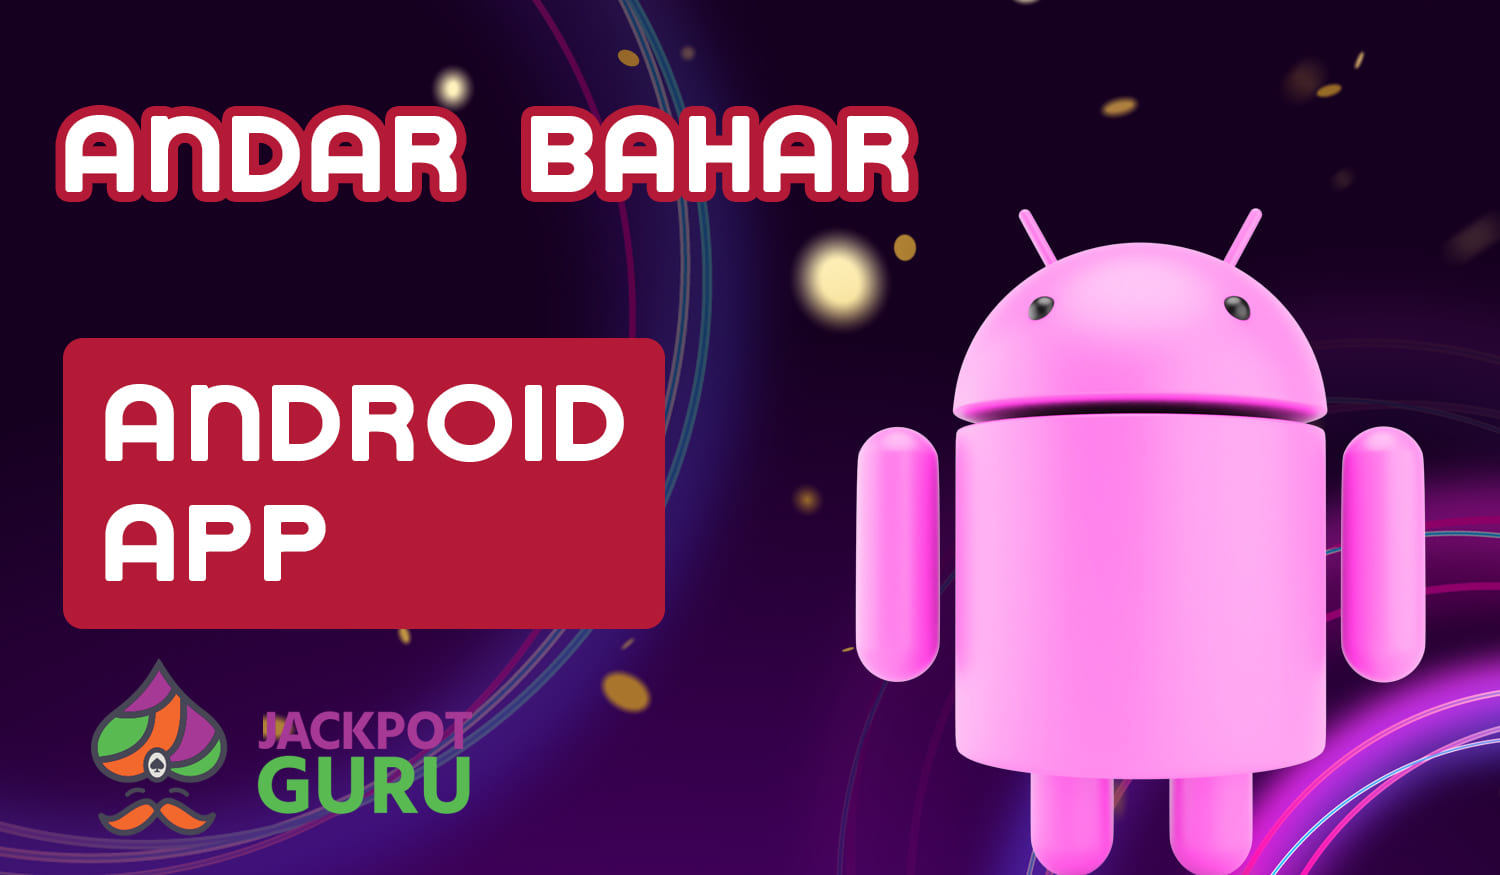 Instructions for beginners how to download and install Jackpot Guru app on android